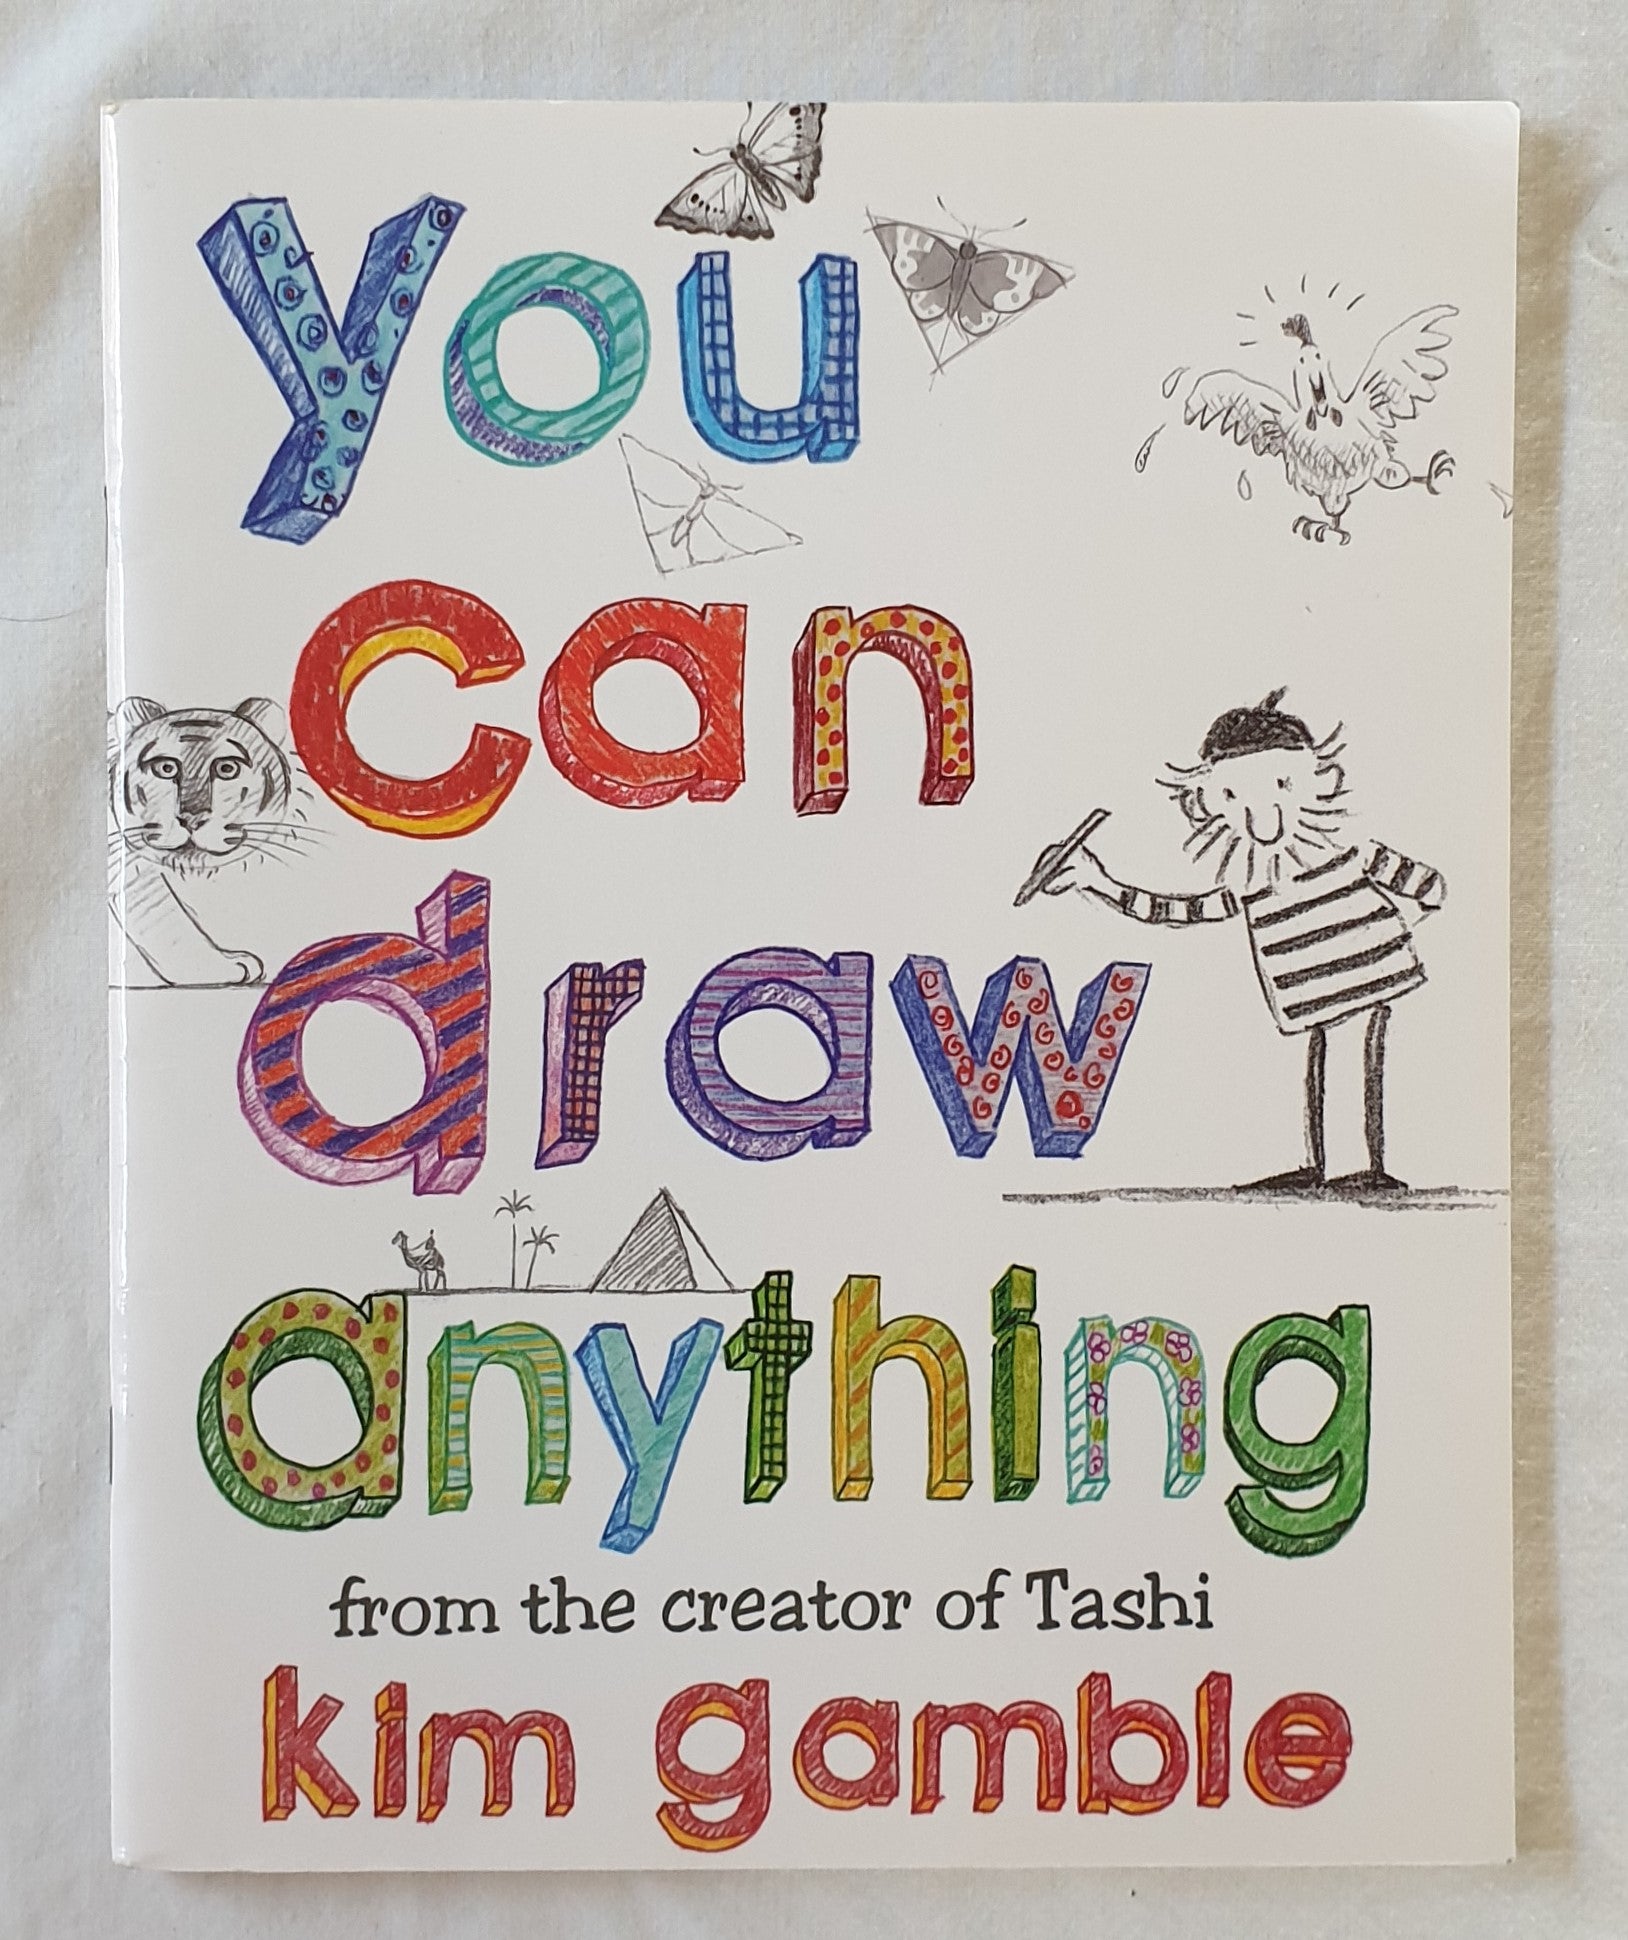 You Can Draw Anything by Kim Gamble